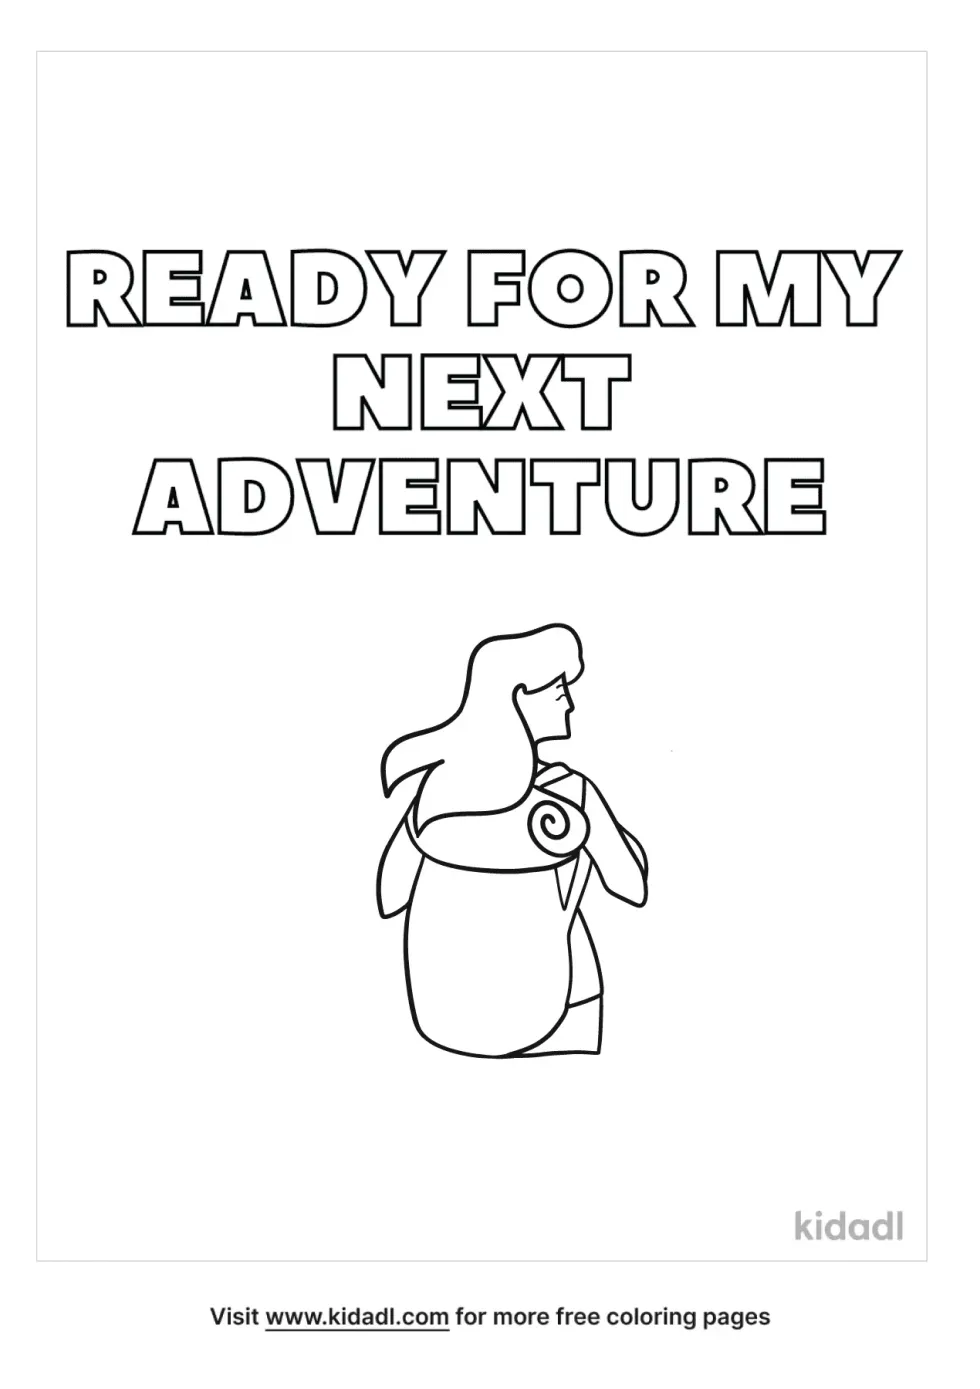 Ready For My Next Adventure Coloring Page